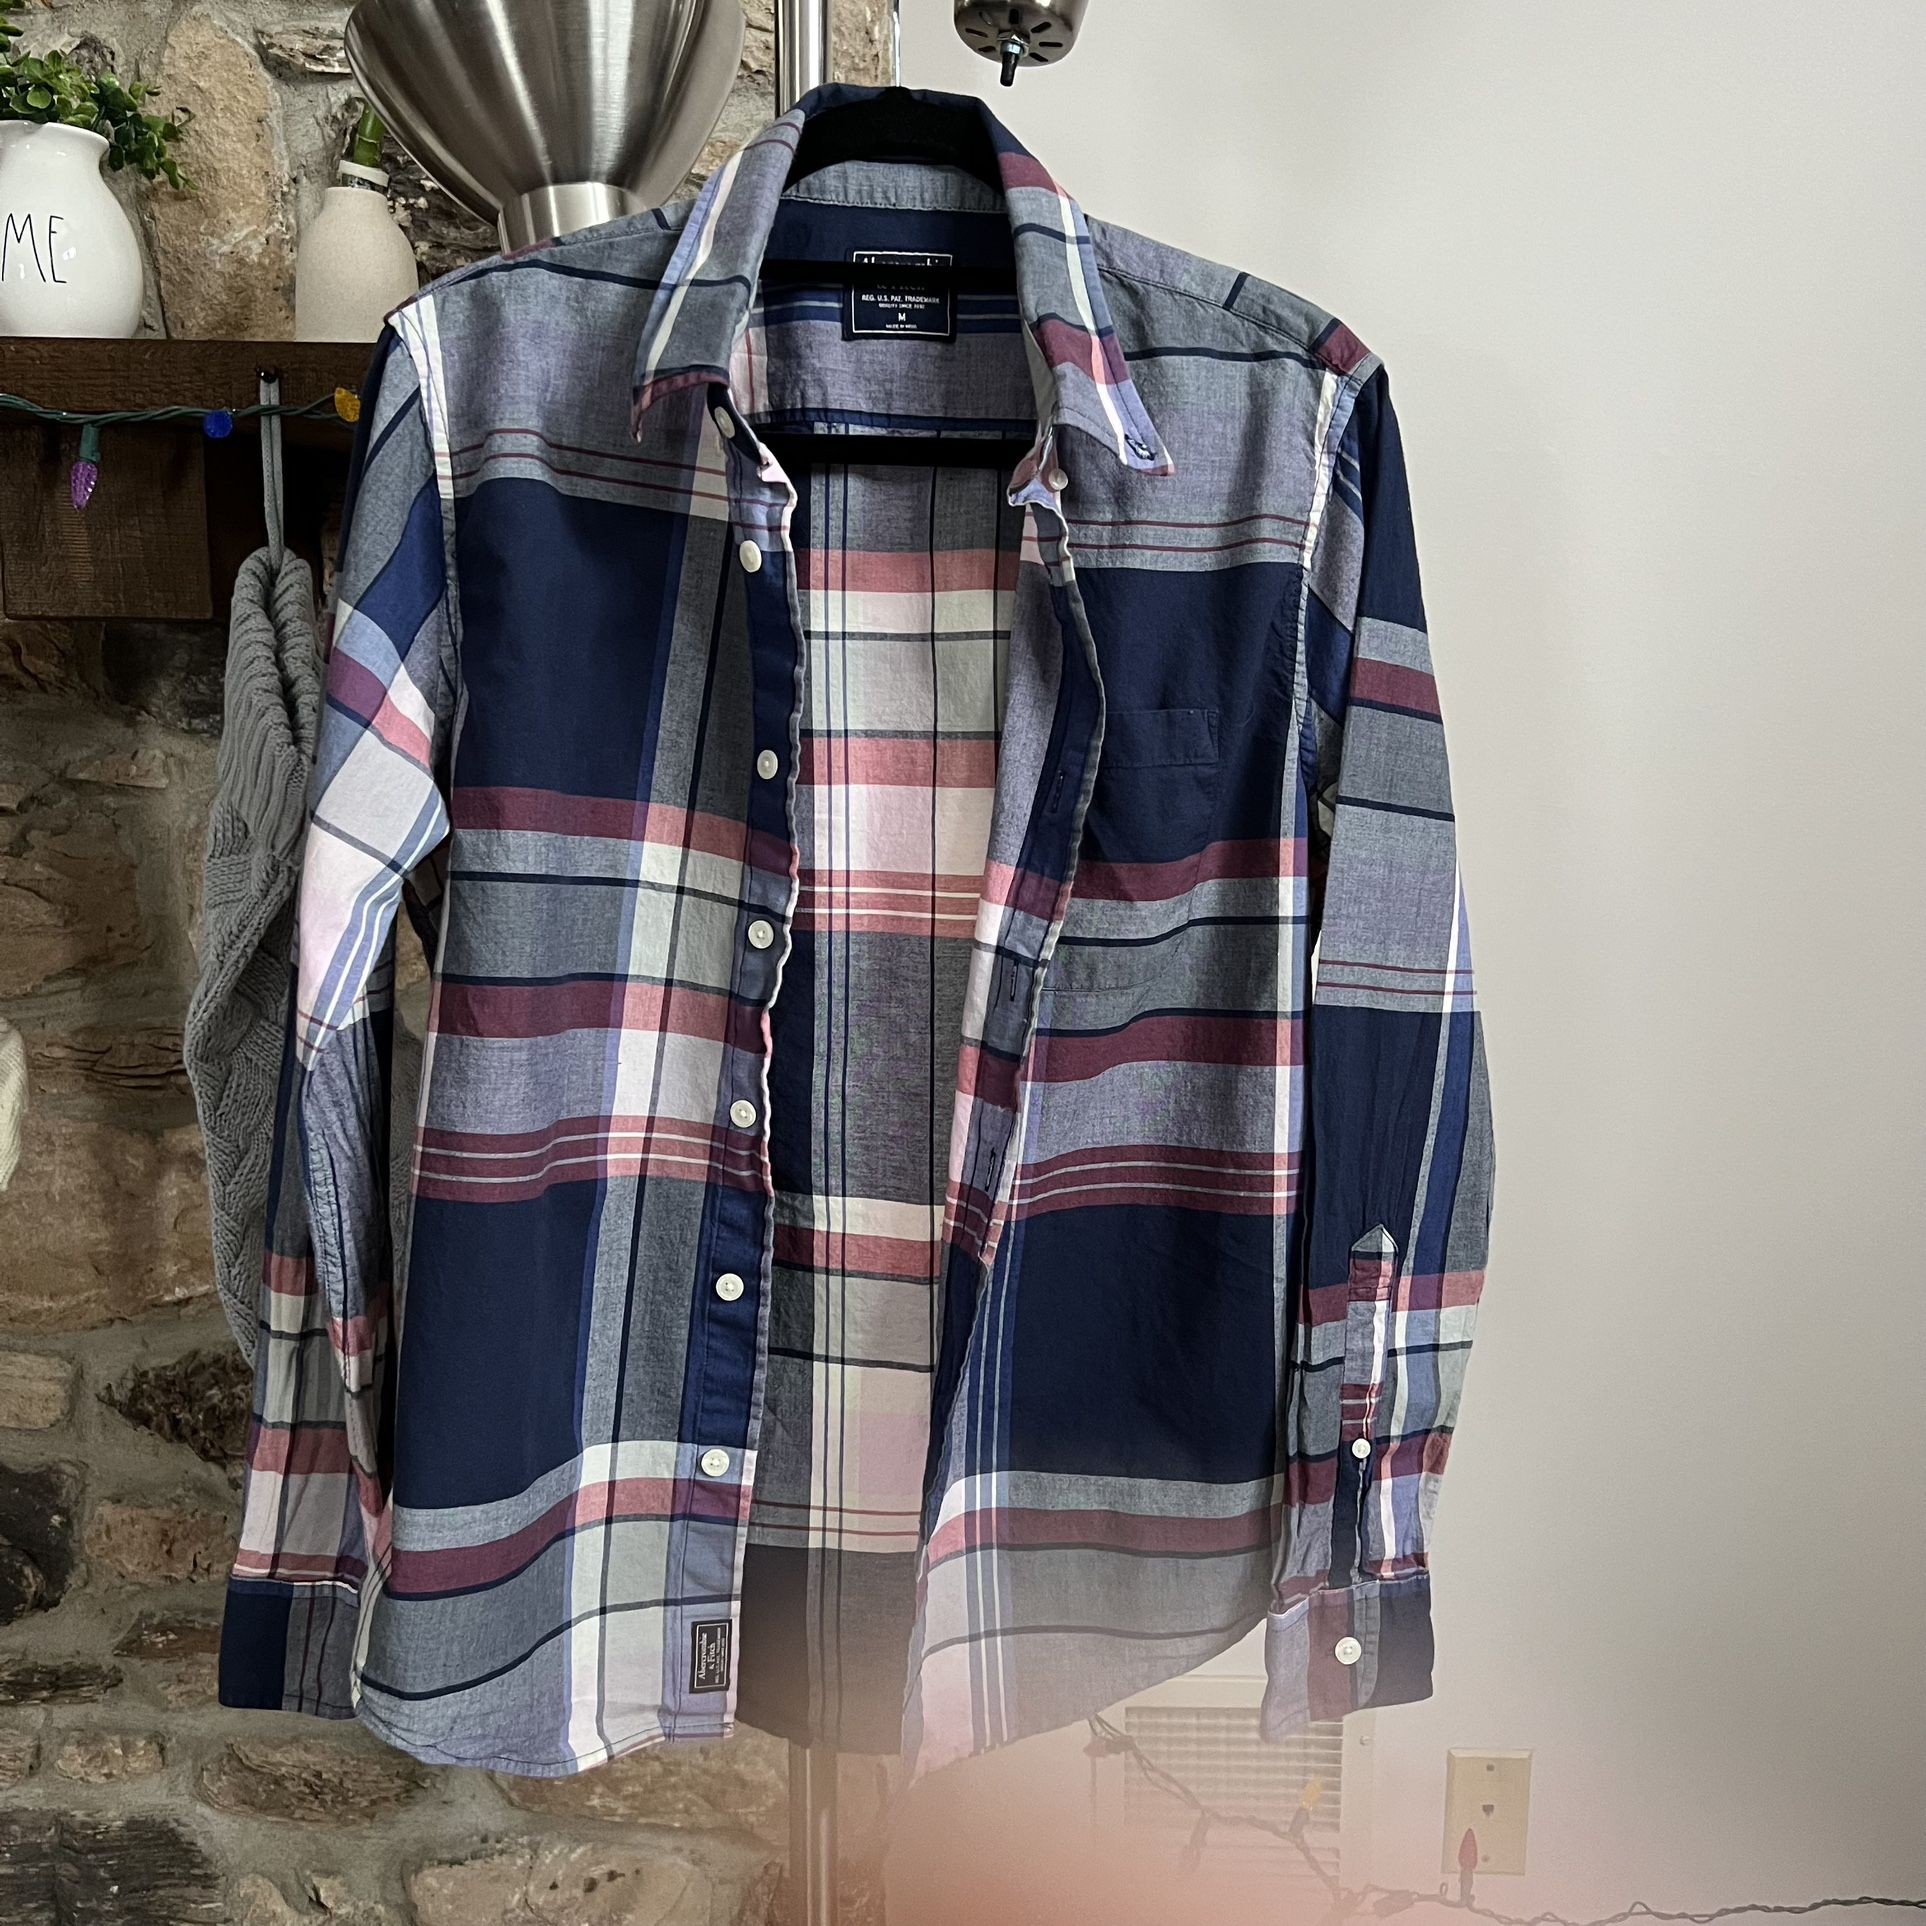 Abercrombie & Fitch Women’s Plaid Flannel Long Sleeve Shirt Size M